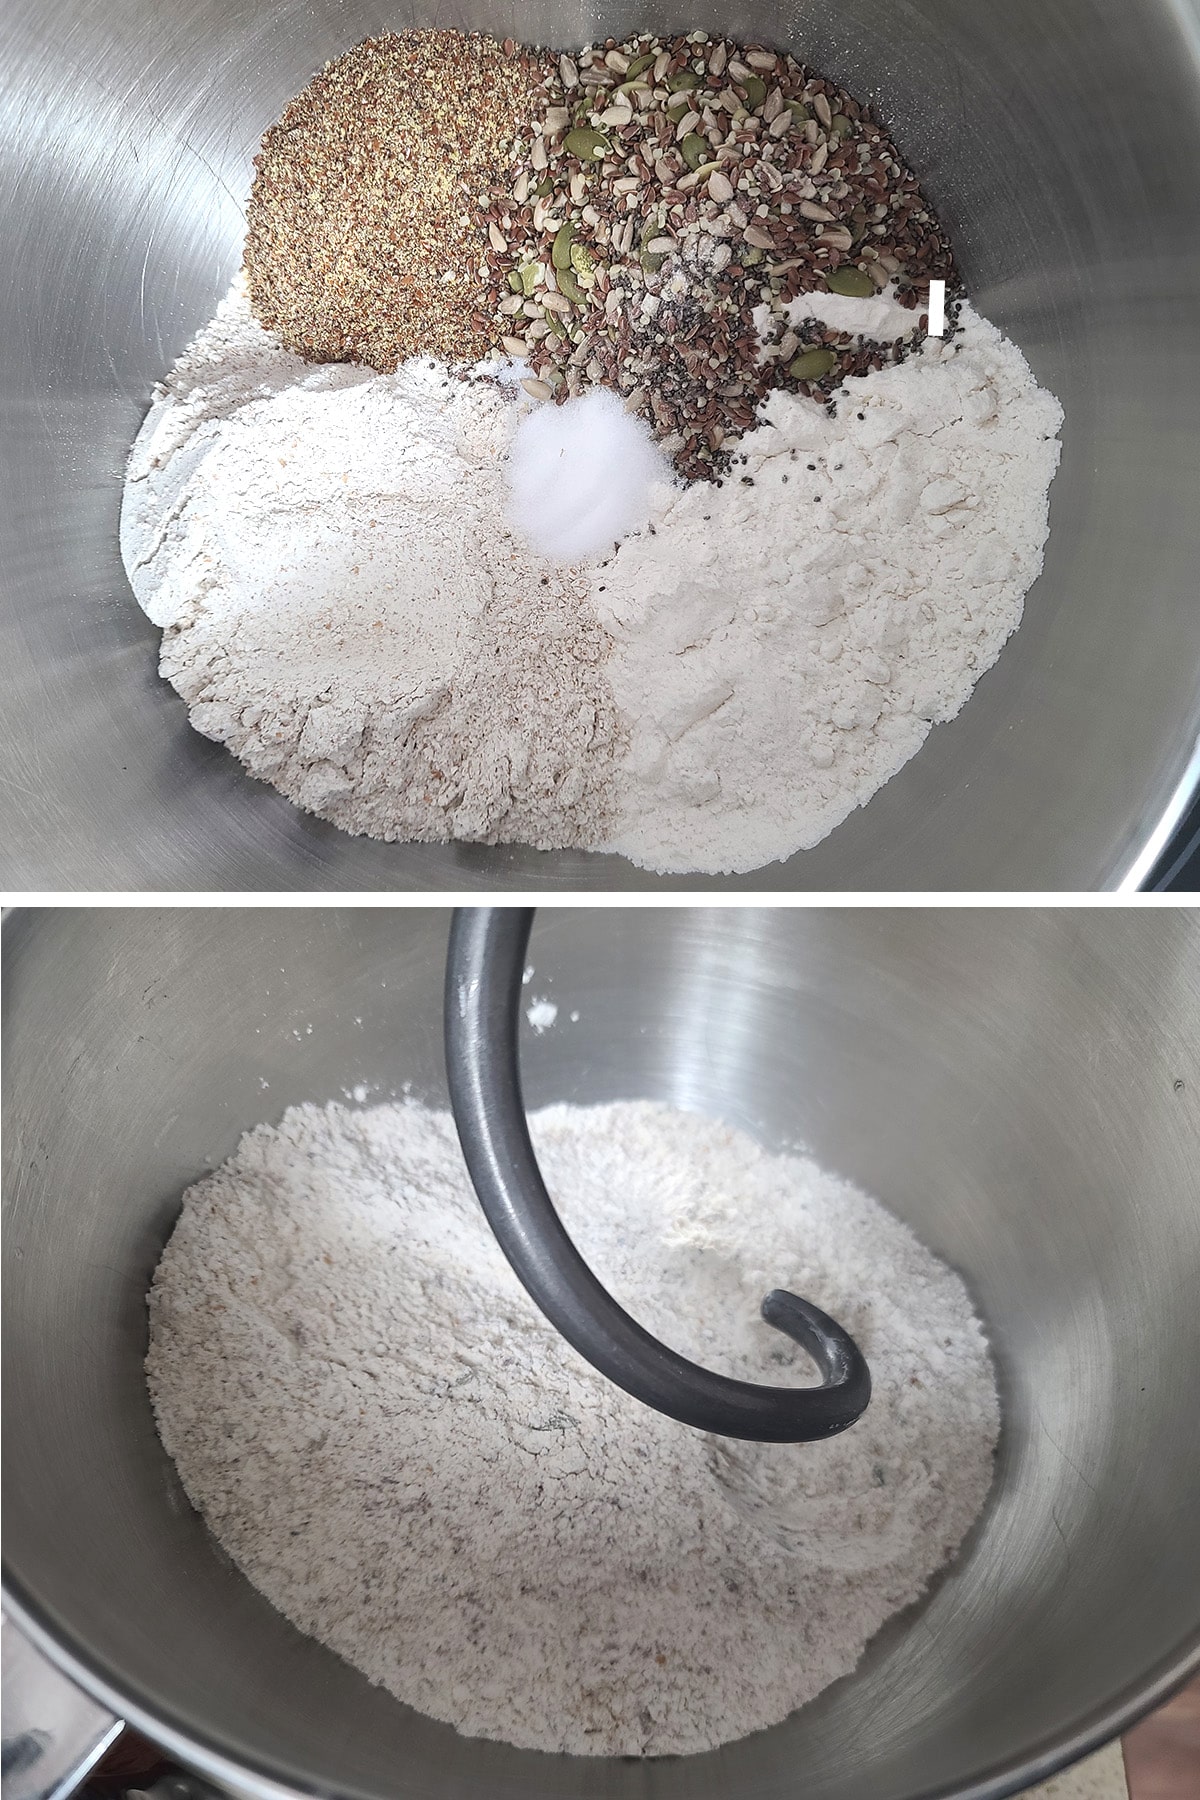 A 2 part image showing a metal mixer bowl with the dry ingredients measured into it, then the dry ingredients after being mixed.